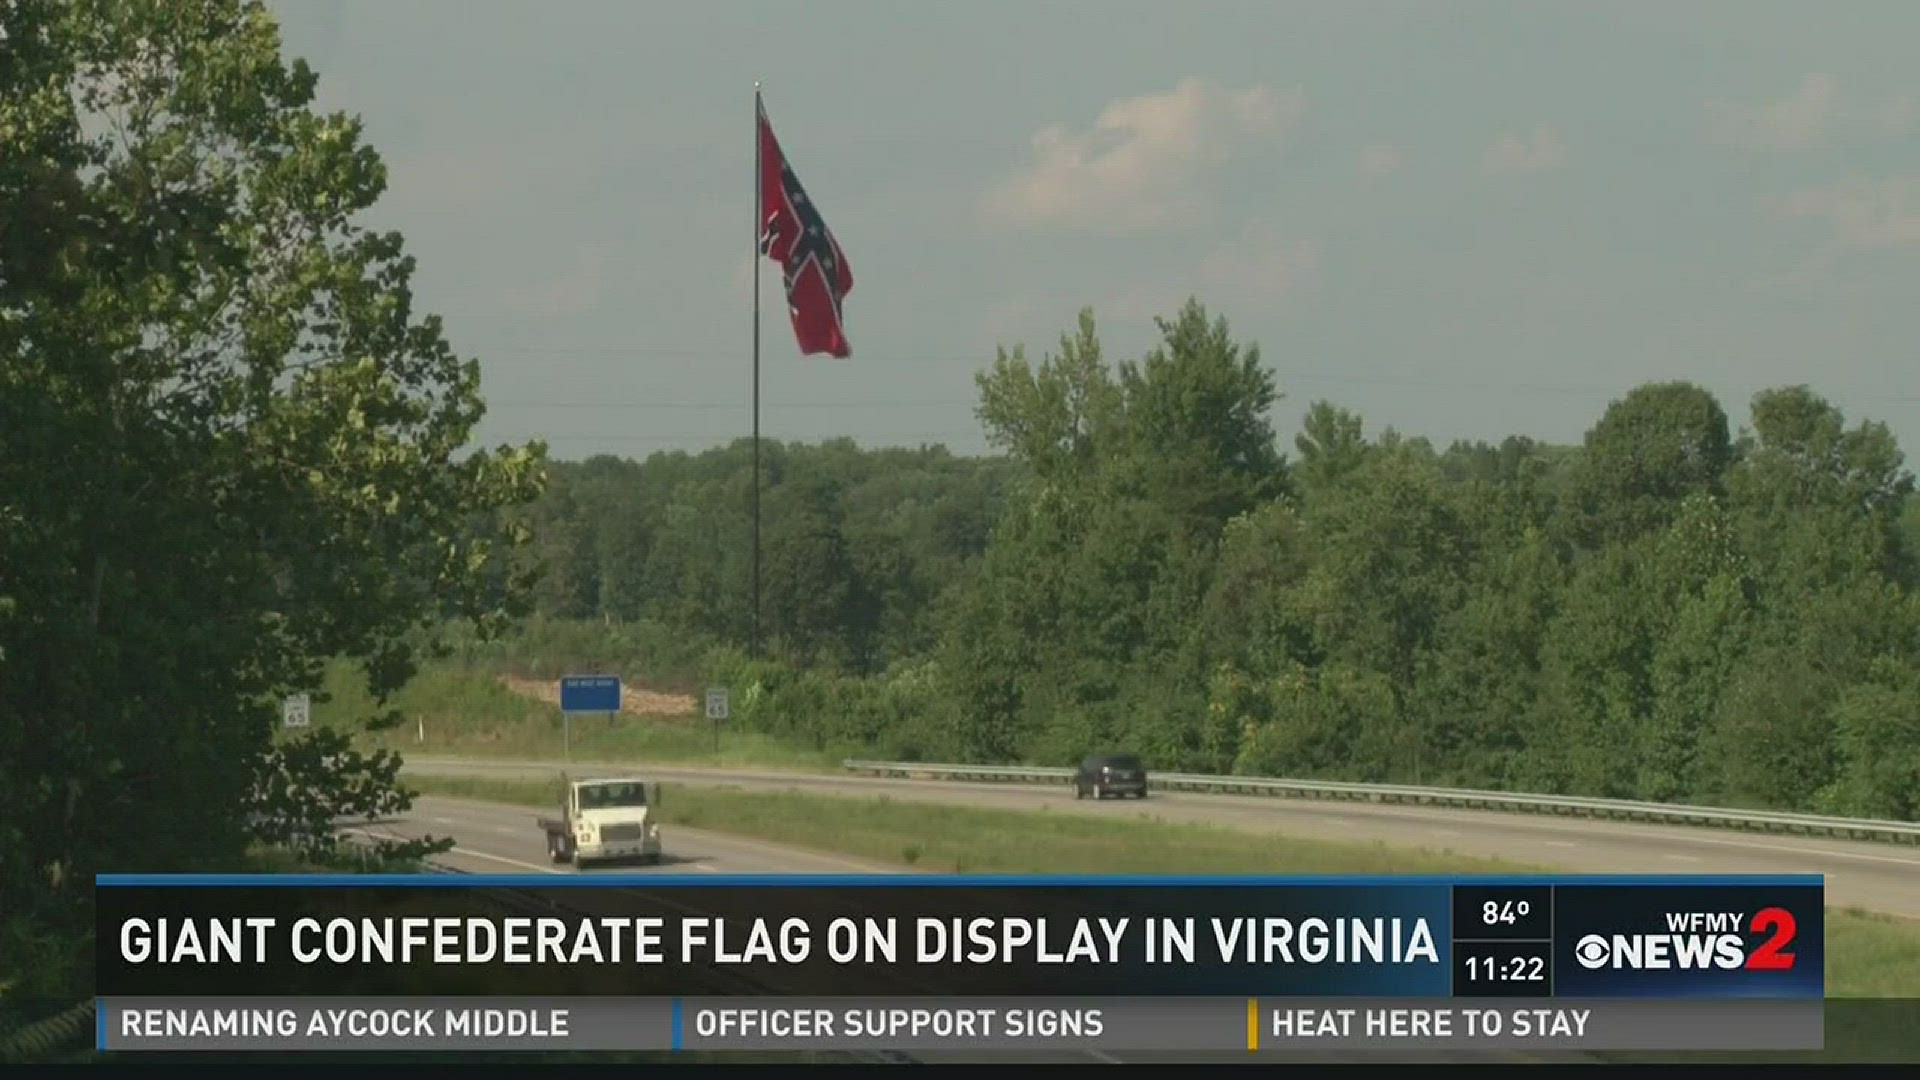 One of the largest Confederate flags ever made just went up in Blairs, near Danville. Hundreds of supporters of the Confederacy raised the 30 by 50 foot flag along the U.S. 29 bypass on Saturday. The flag was raised to protest a decision by the Danville City Council to remove the Confederate flag from city property.